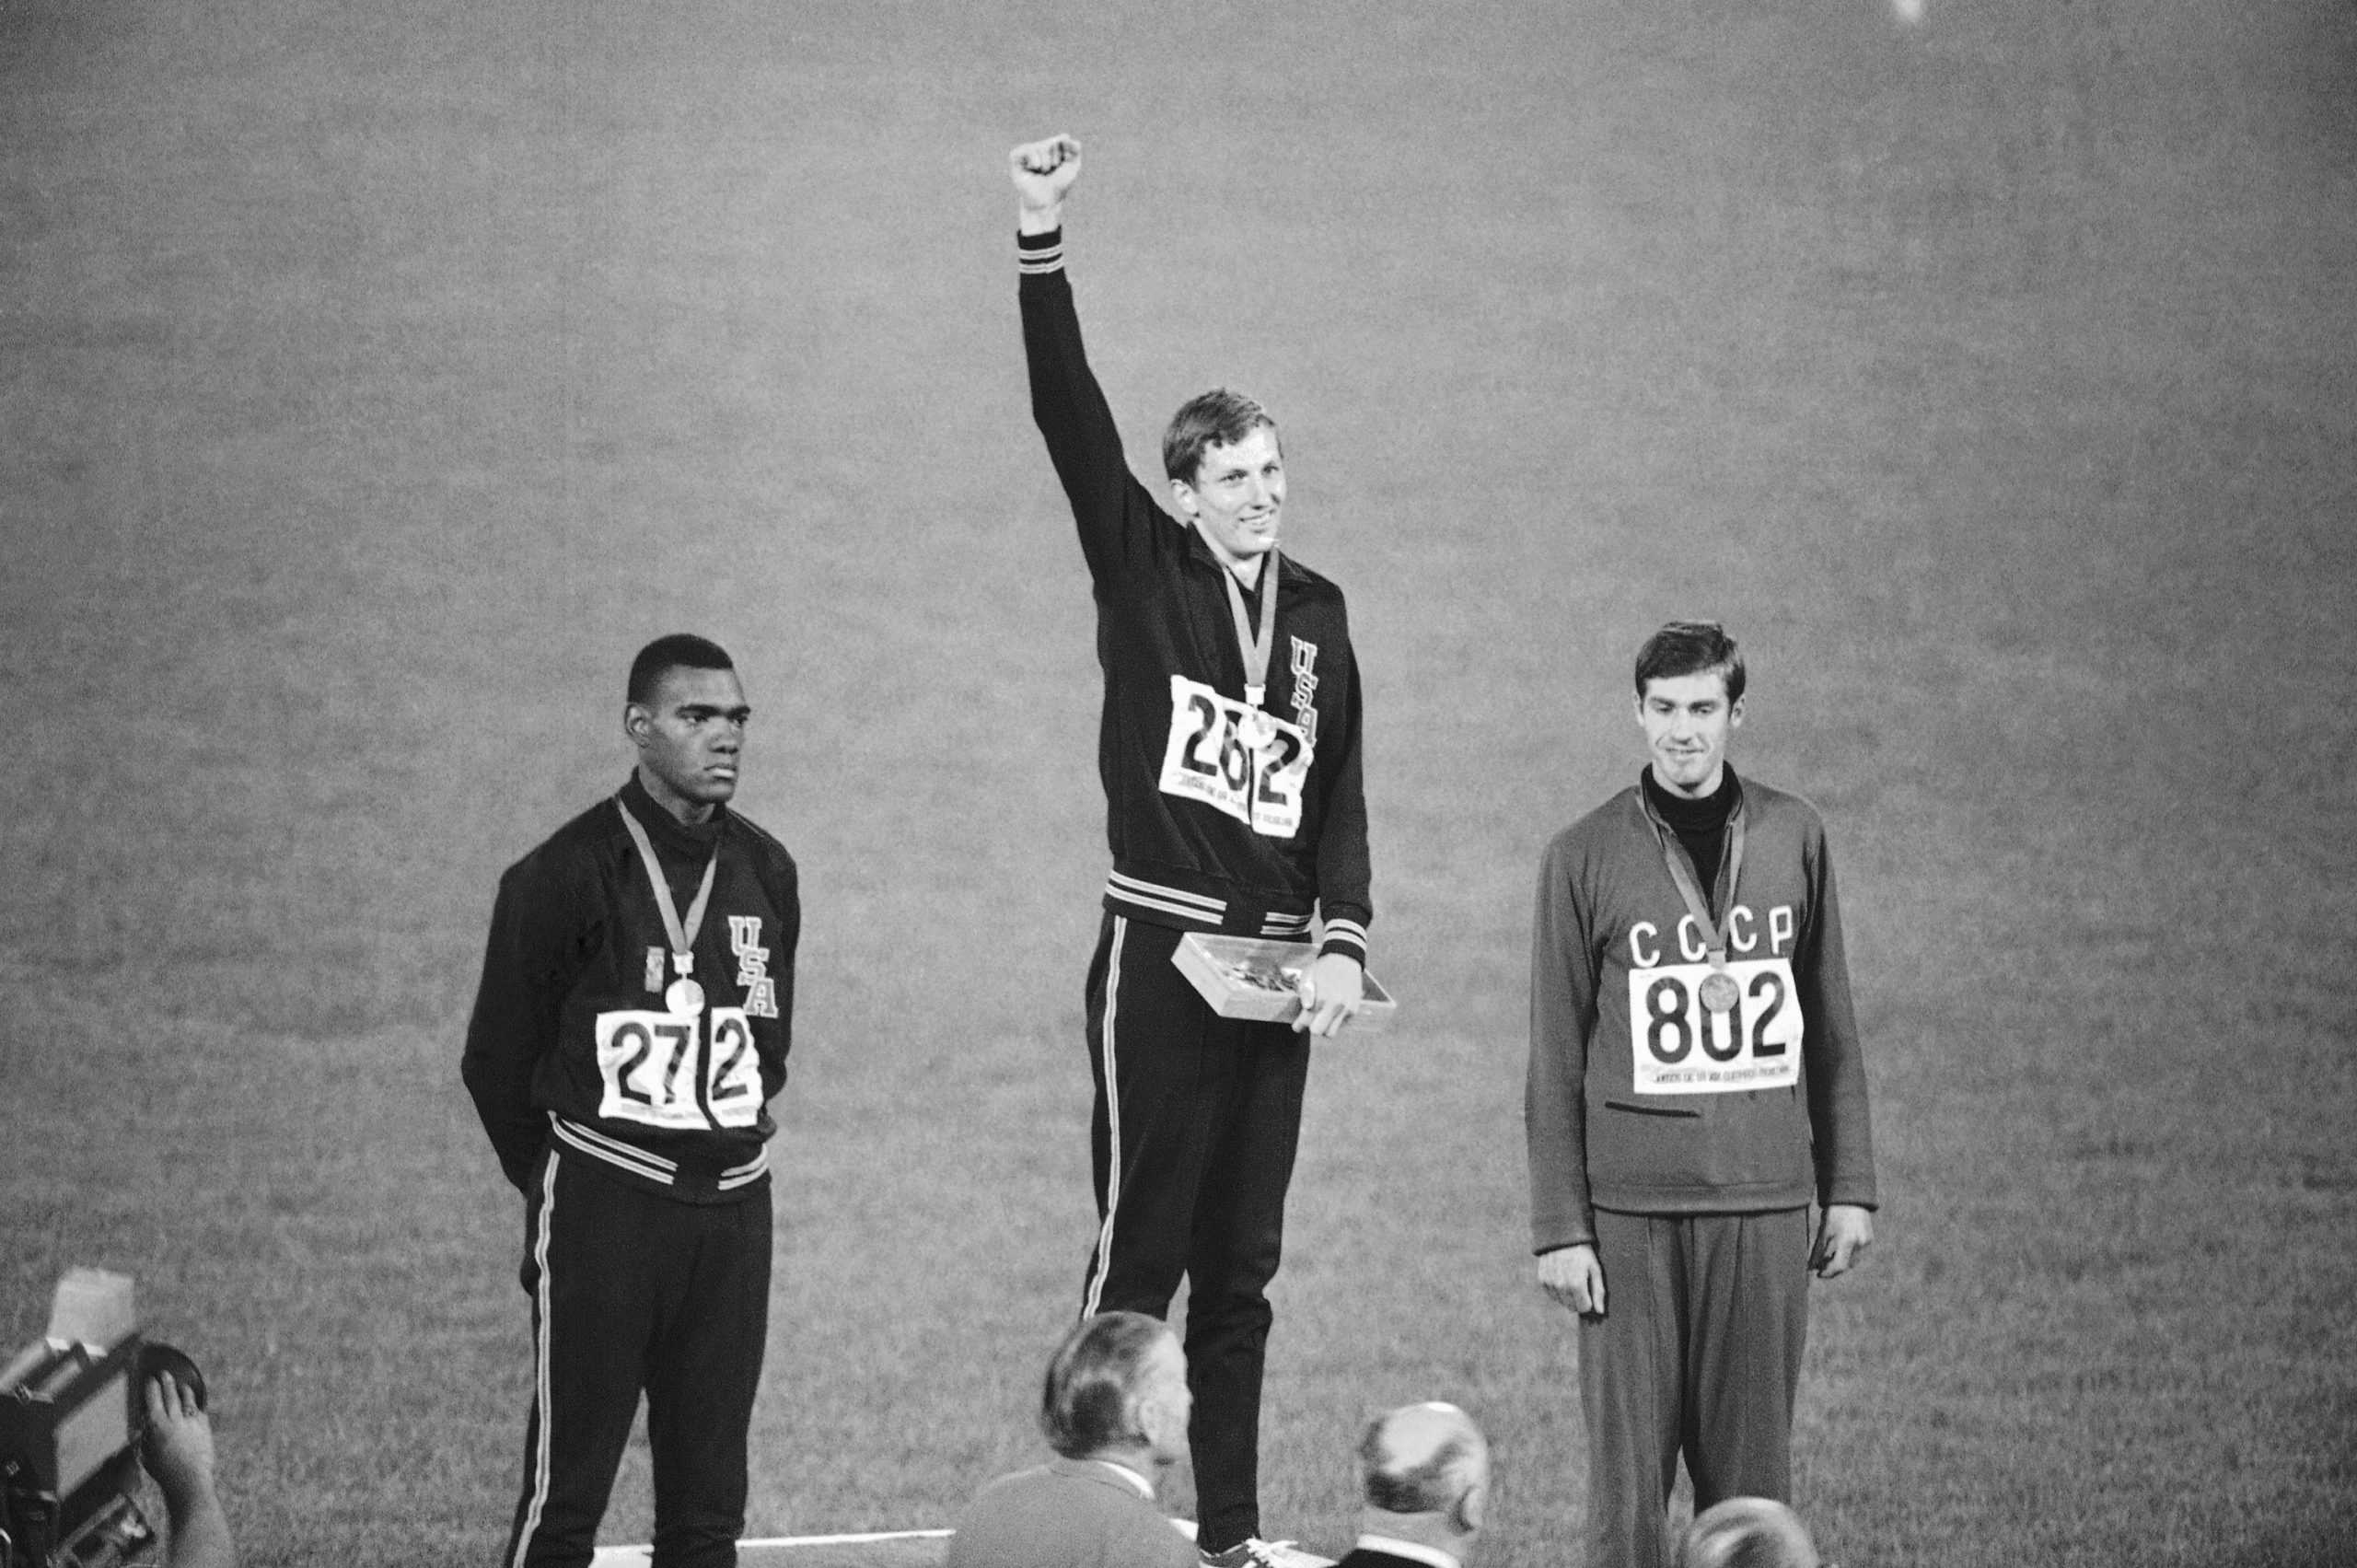 Dick Fosbury of the United States, originator of the "Fosbury Flop" backward high jump, raises his arm on the victor's podium of the Olympic stadium, Oct. 20, 1968 in Mexico City as he takes applause for  his 2.24 meter (7 ft., 4 ? ins.) Olympic record leap and gold medal. At left is silver medalist Ed Caruthers of the U.S., who jumped 2.22 meters (7 ft., 3 ? ins.) in orthodox style, and at right is Valentin Gavrilov of Russia, bronze medalist with 2.20 meter (7 ft., 2 ? ins.) jump. (AP Photo)